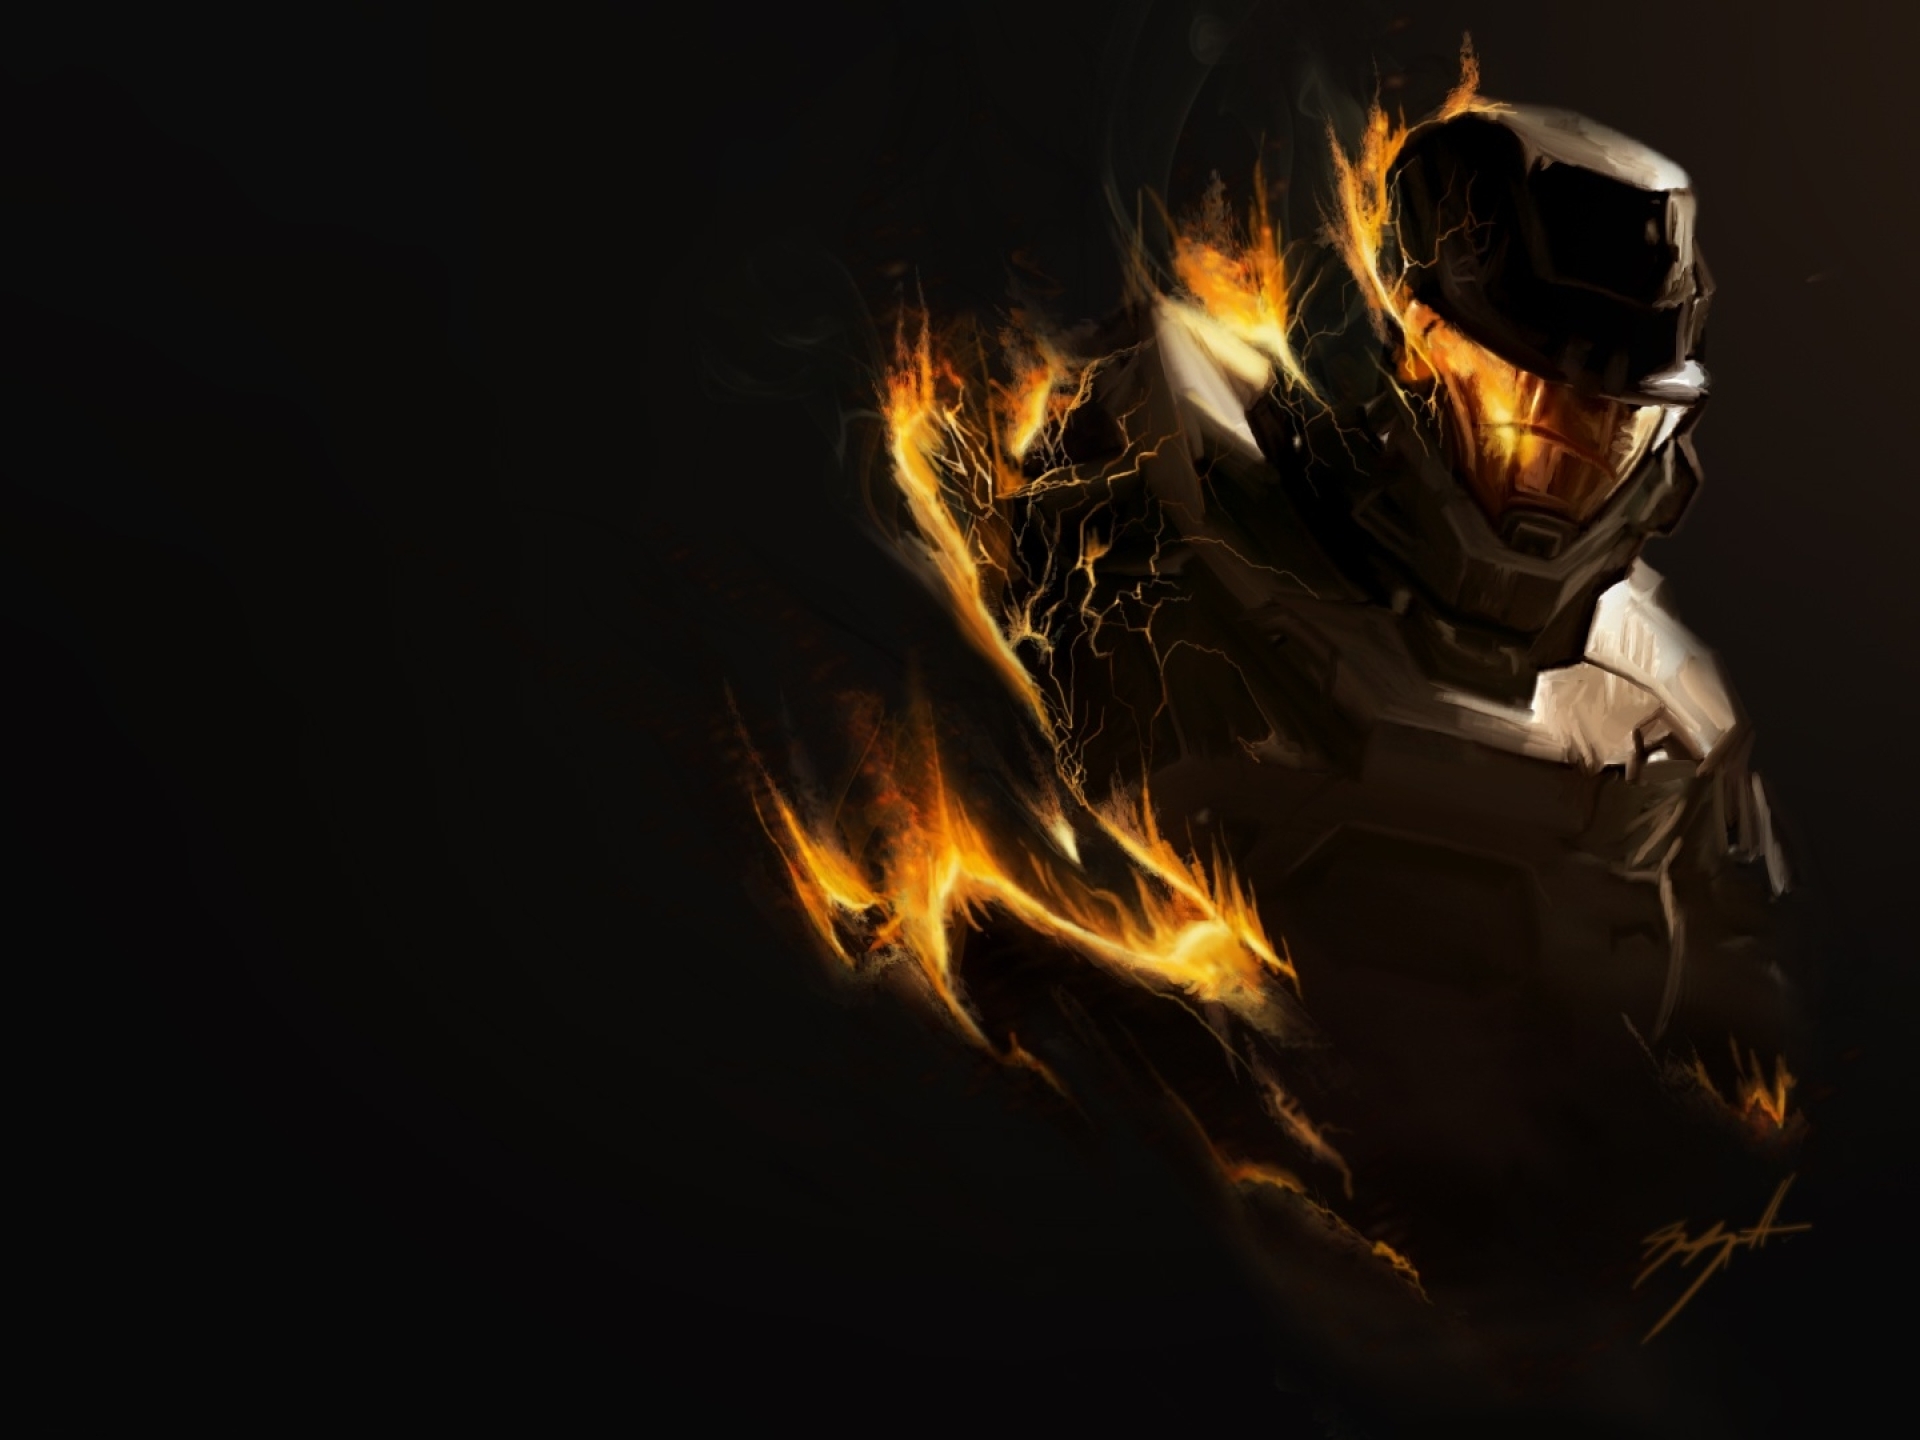 1920x1440 halo, fire, soldier 1920x1440 Resolution Wallpaper, HD Games ...